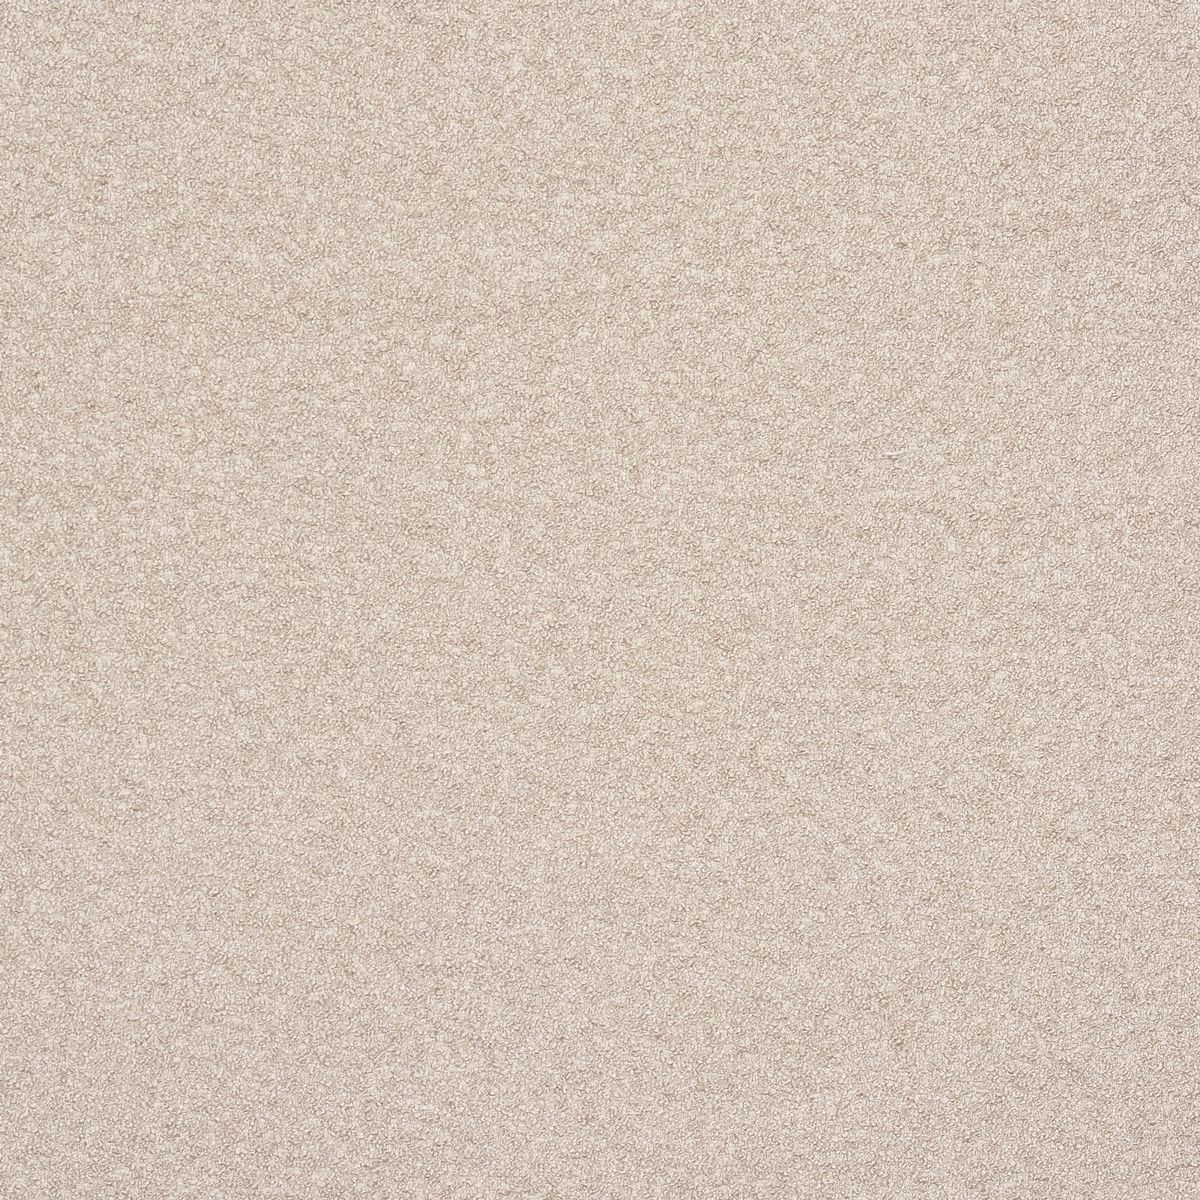 Lux Boucle Stone Fabric by Porter & Stone